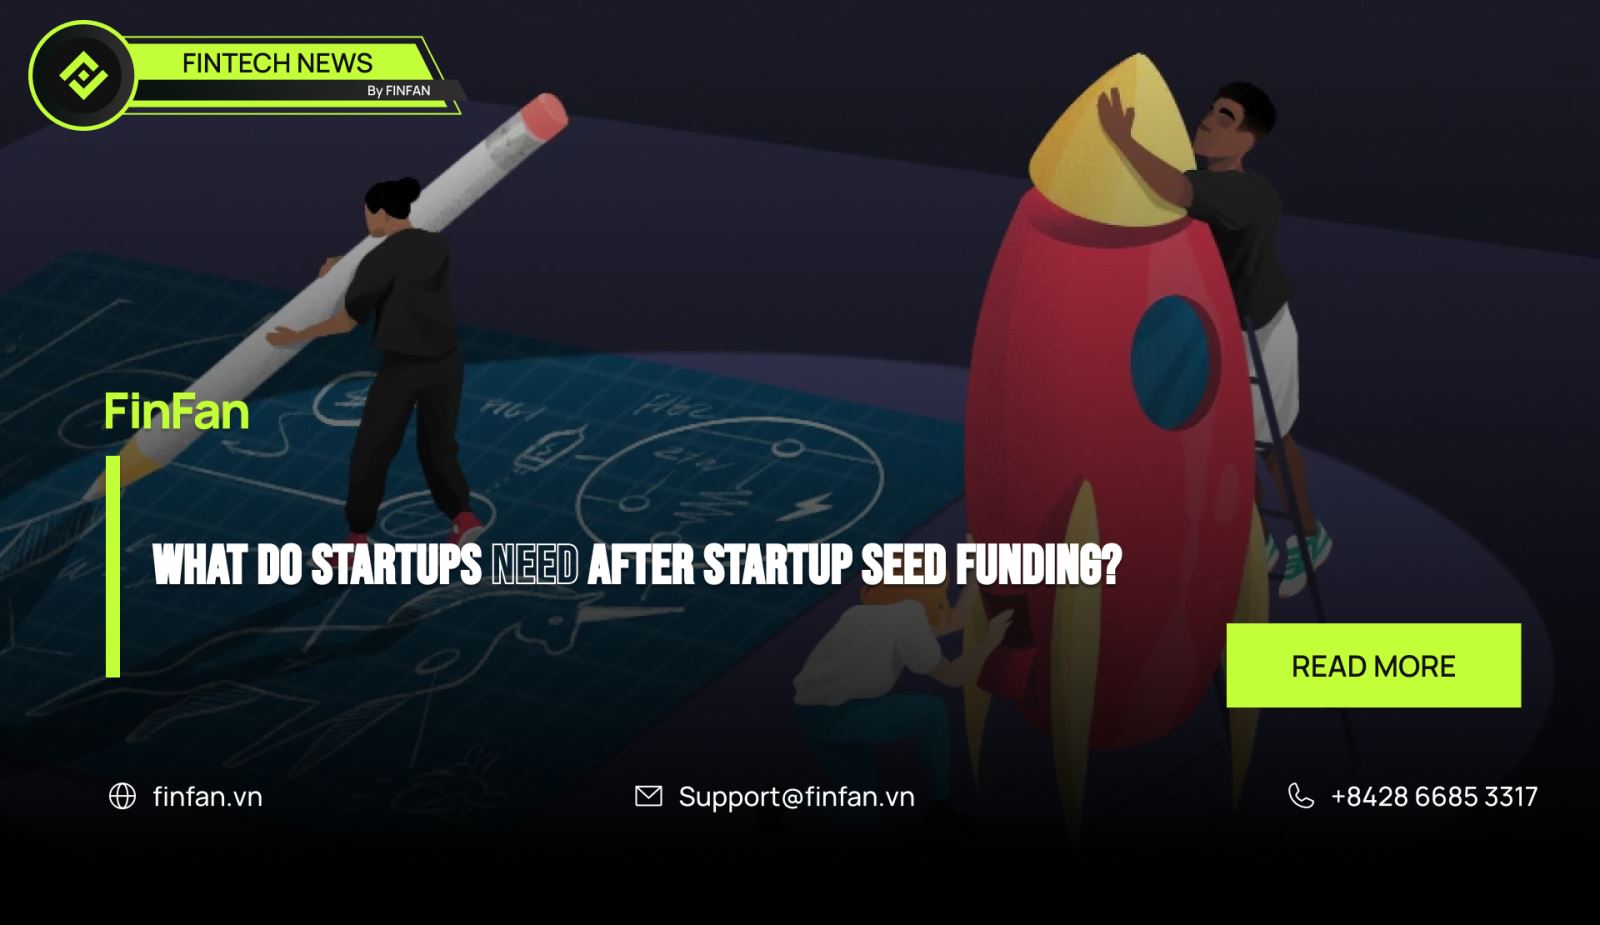 What do startups need after startup seed funding?